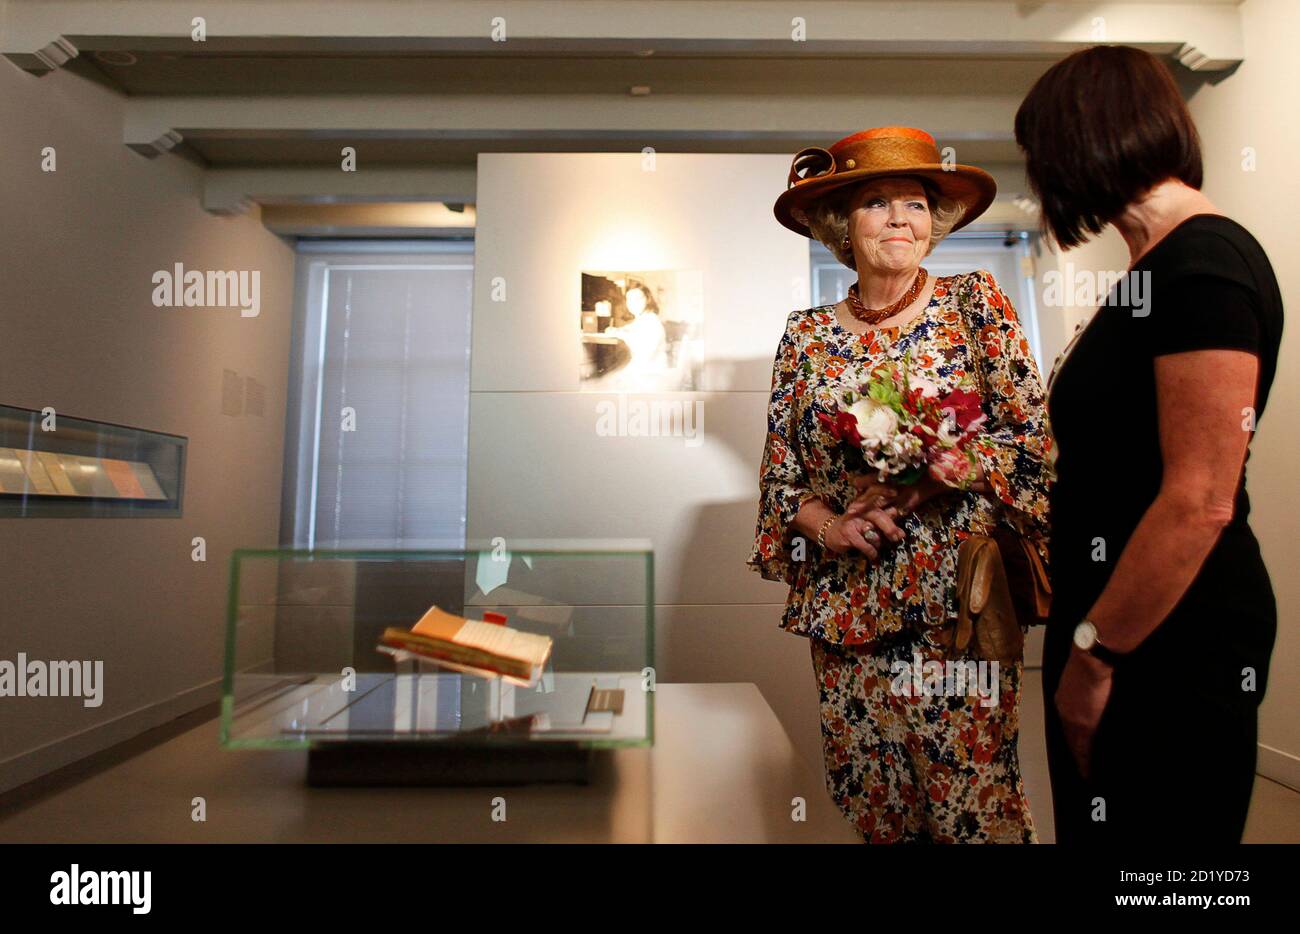 Dutch Queen Beatrix (L) stands next to the well-known first diary of Anne Frank, on display in the Anne Frank House in Amsterdam April 28, 2010. Fifty years after the opening of the Anne Frank House museum, which has more than 1 million visitors every year, the museum is launching an online virtual tour of what life was like at the back of 263 Prinsengracht in Amsterdam. To match Reuters Life! ANNEFRANK-TOUR/   REUTERS/Cris Toala Olivares (NETHERLANDS - Tags: SOCIETY ROYALS TRAVEL) Stock Photo